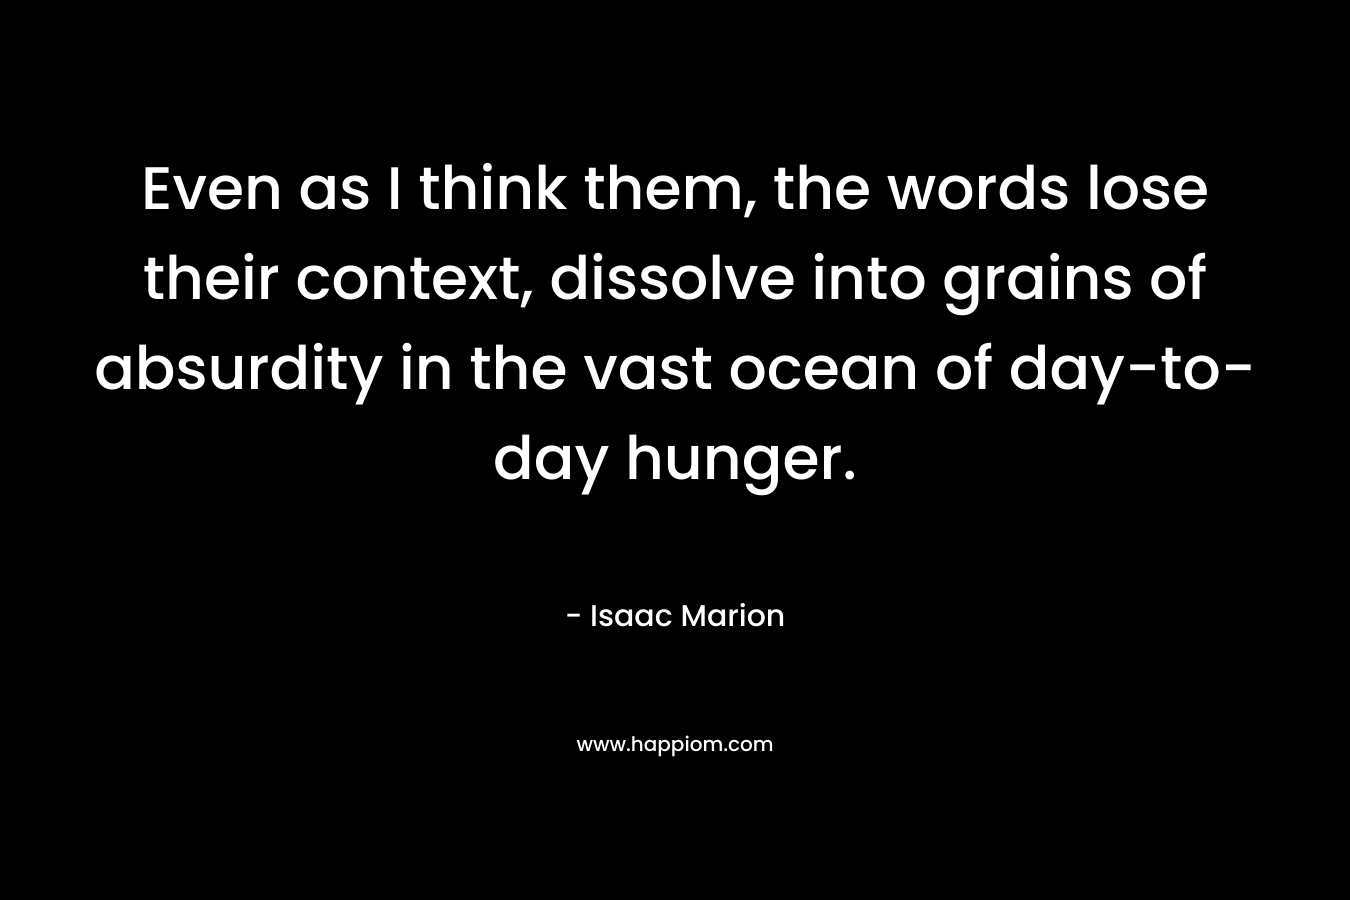 Even as I think them, the words lose their context, dissolve into grains of absurdity in the vast ocean of day-to-day hunger. – Isaac Marion